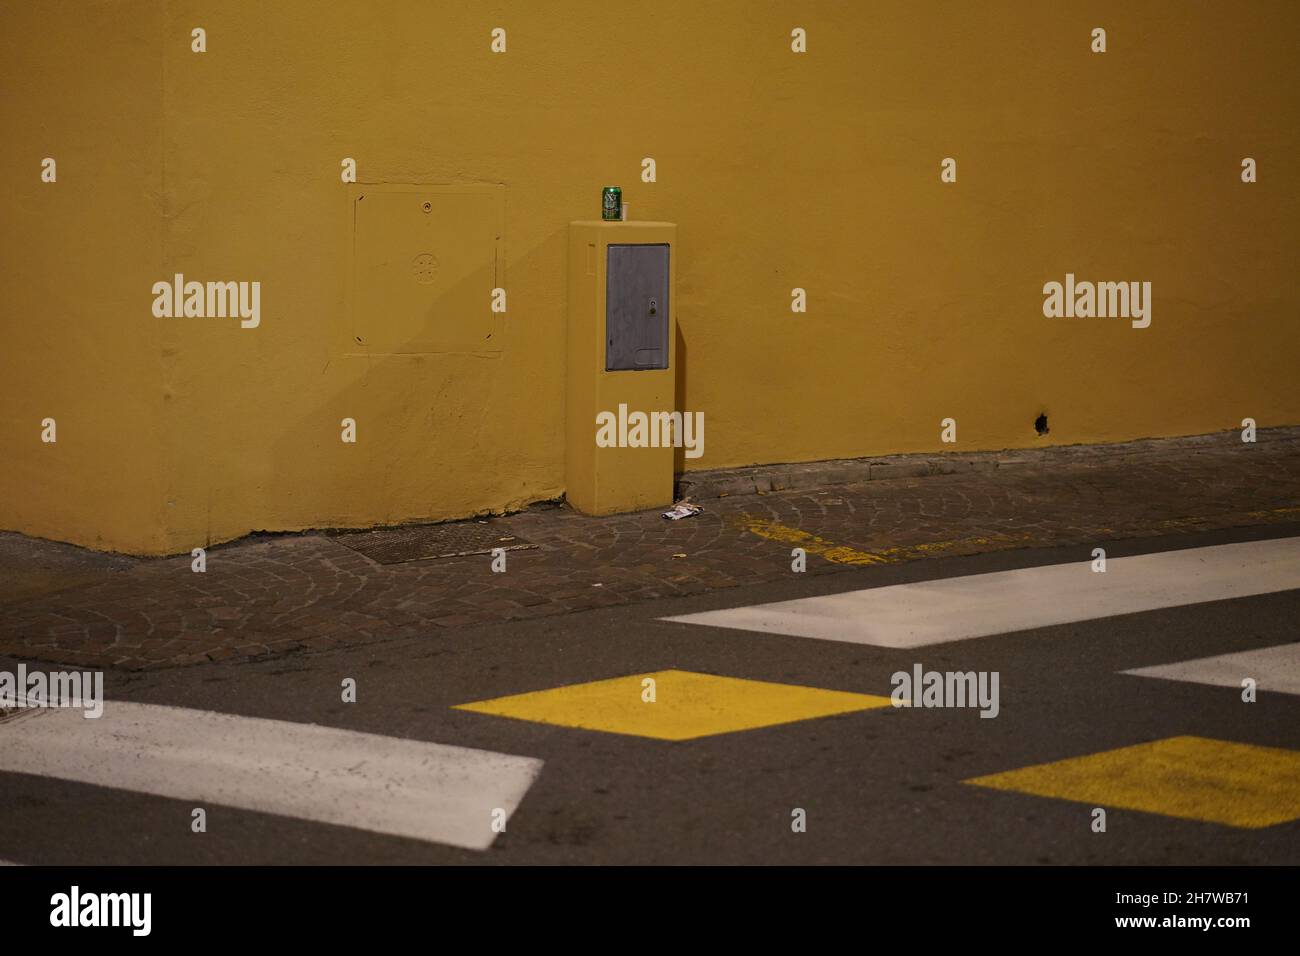 A dropped off drinks can in front of a yellow house wall on a street with yellow and white markings in Bologna, Italy. Stock Photo